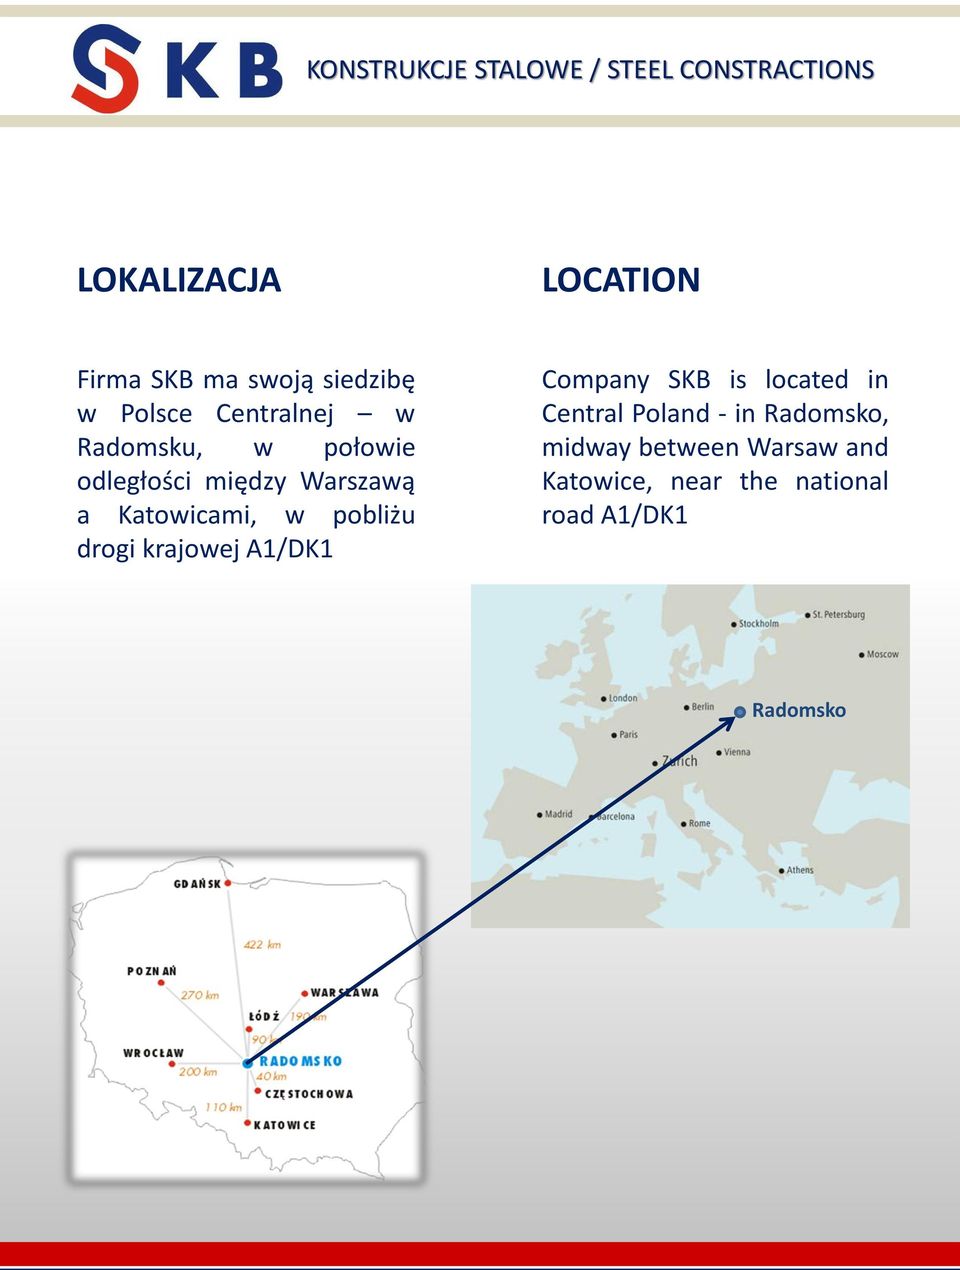 drogi krajowej A1/DK1 Company SKB is located in Central Poland - in